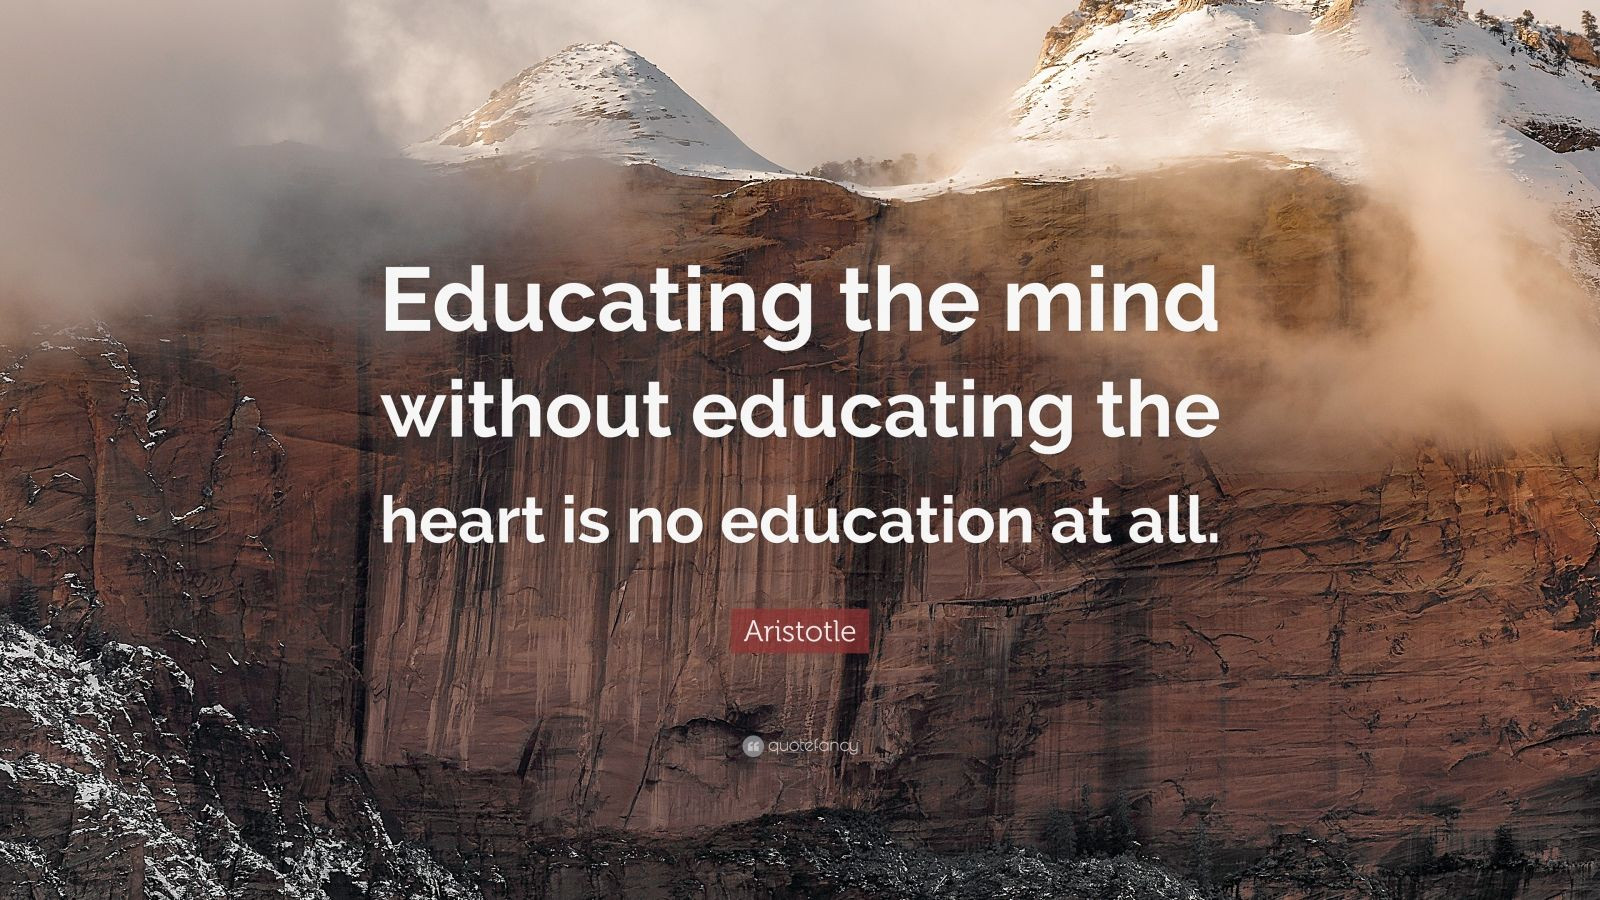 Aristotle Education Quotes
 Aristotle Quote “Educating the mind without educating the